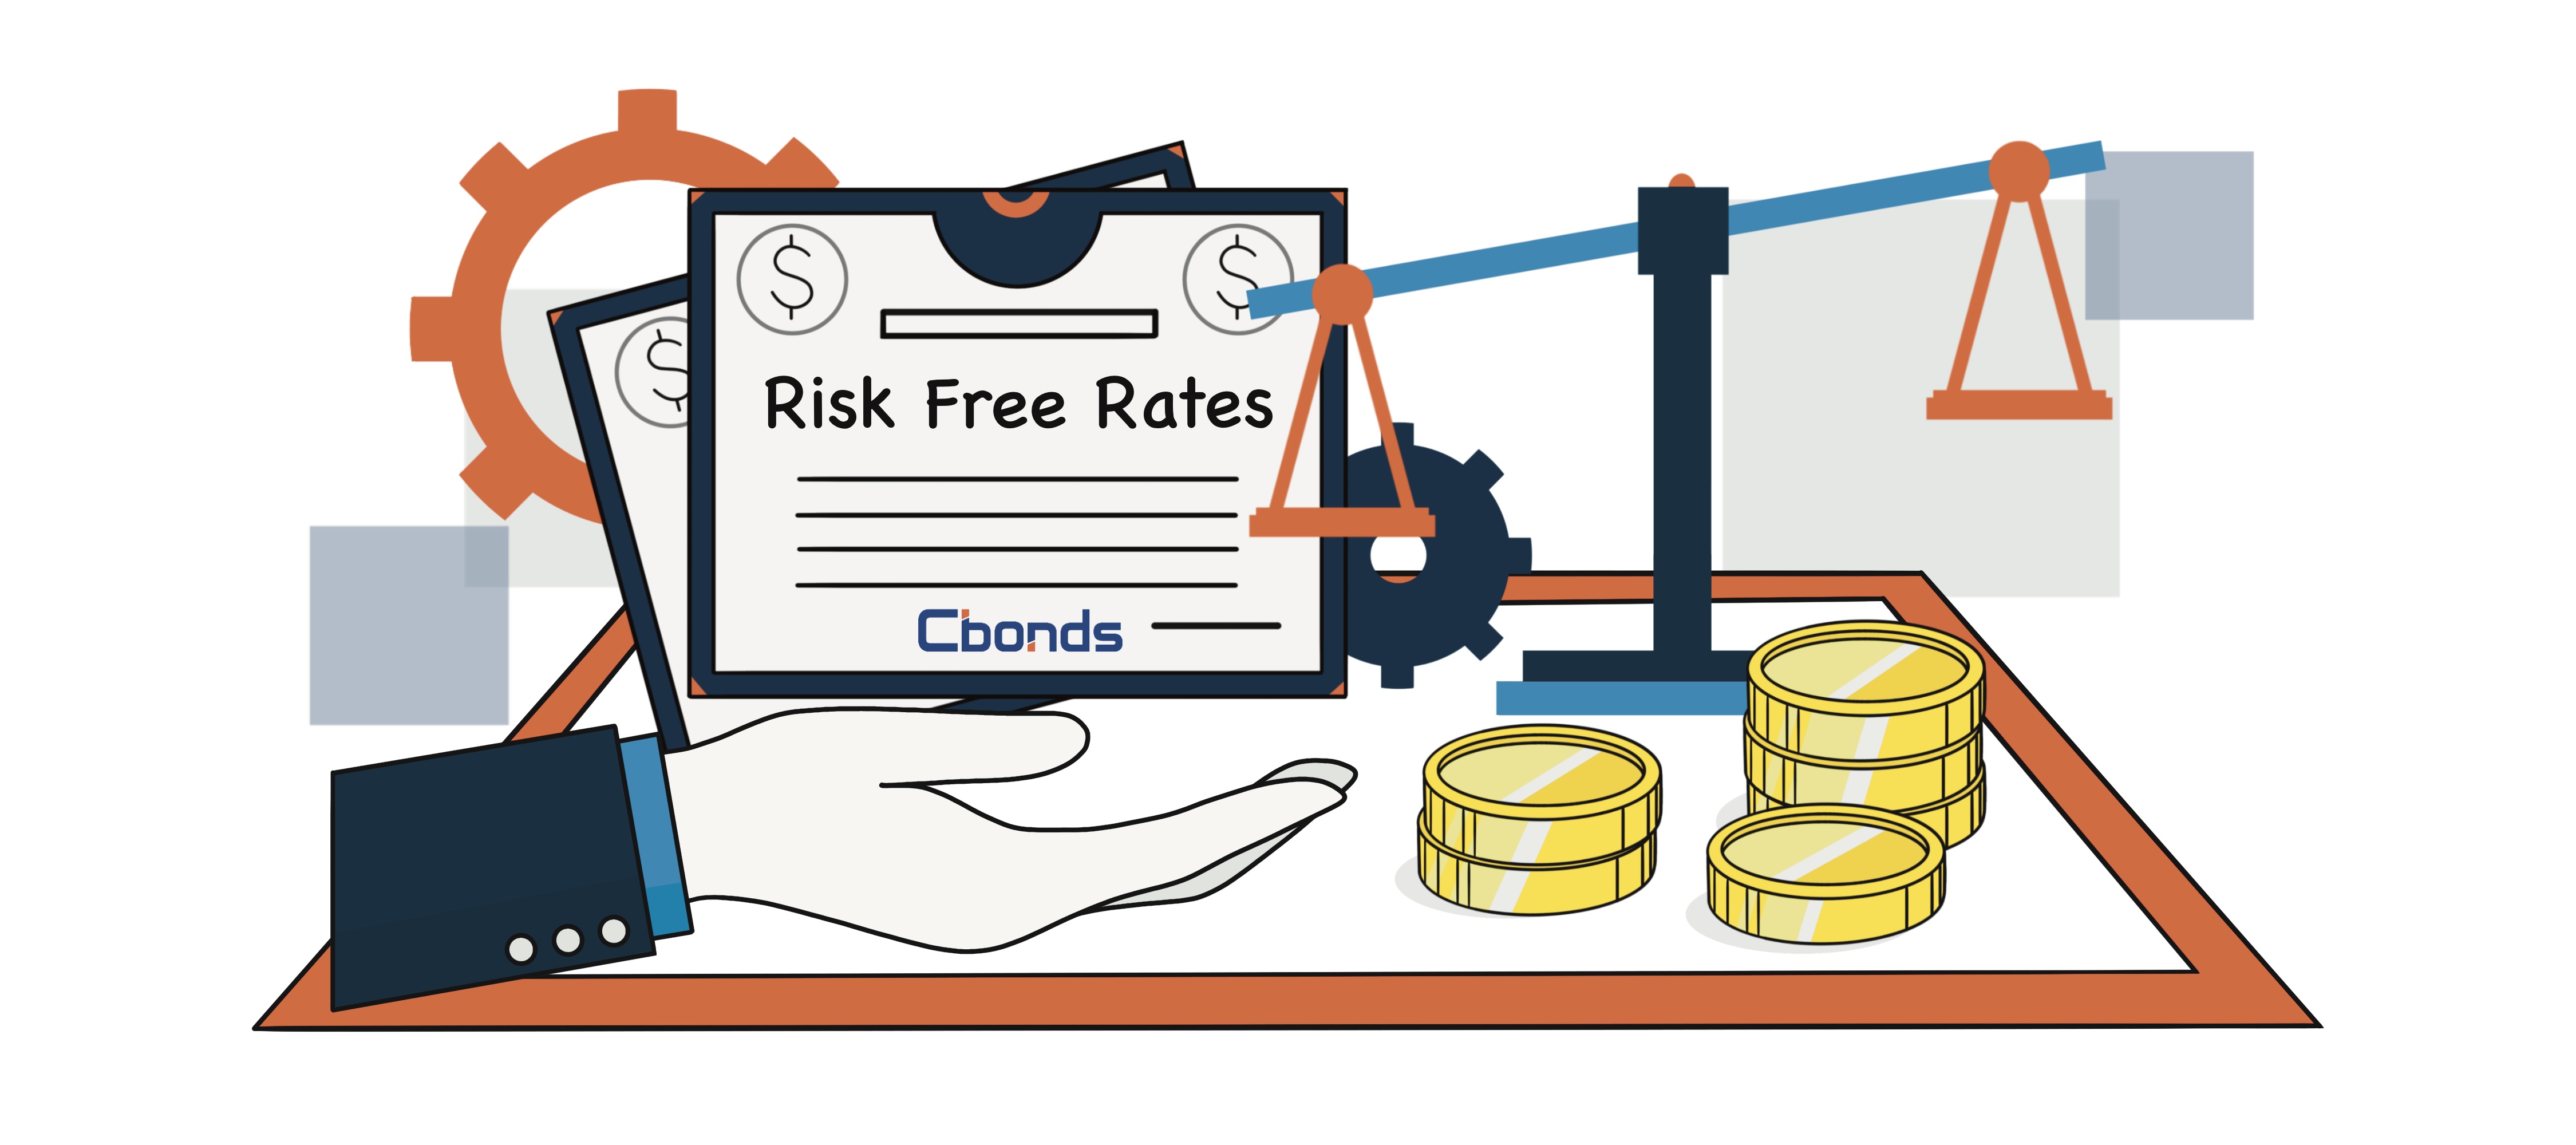 Risk Free Rates